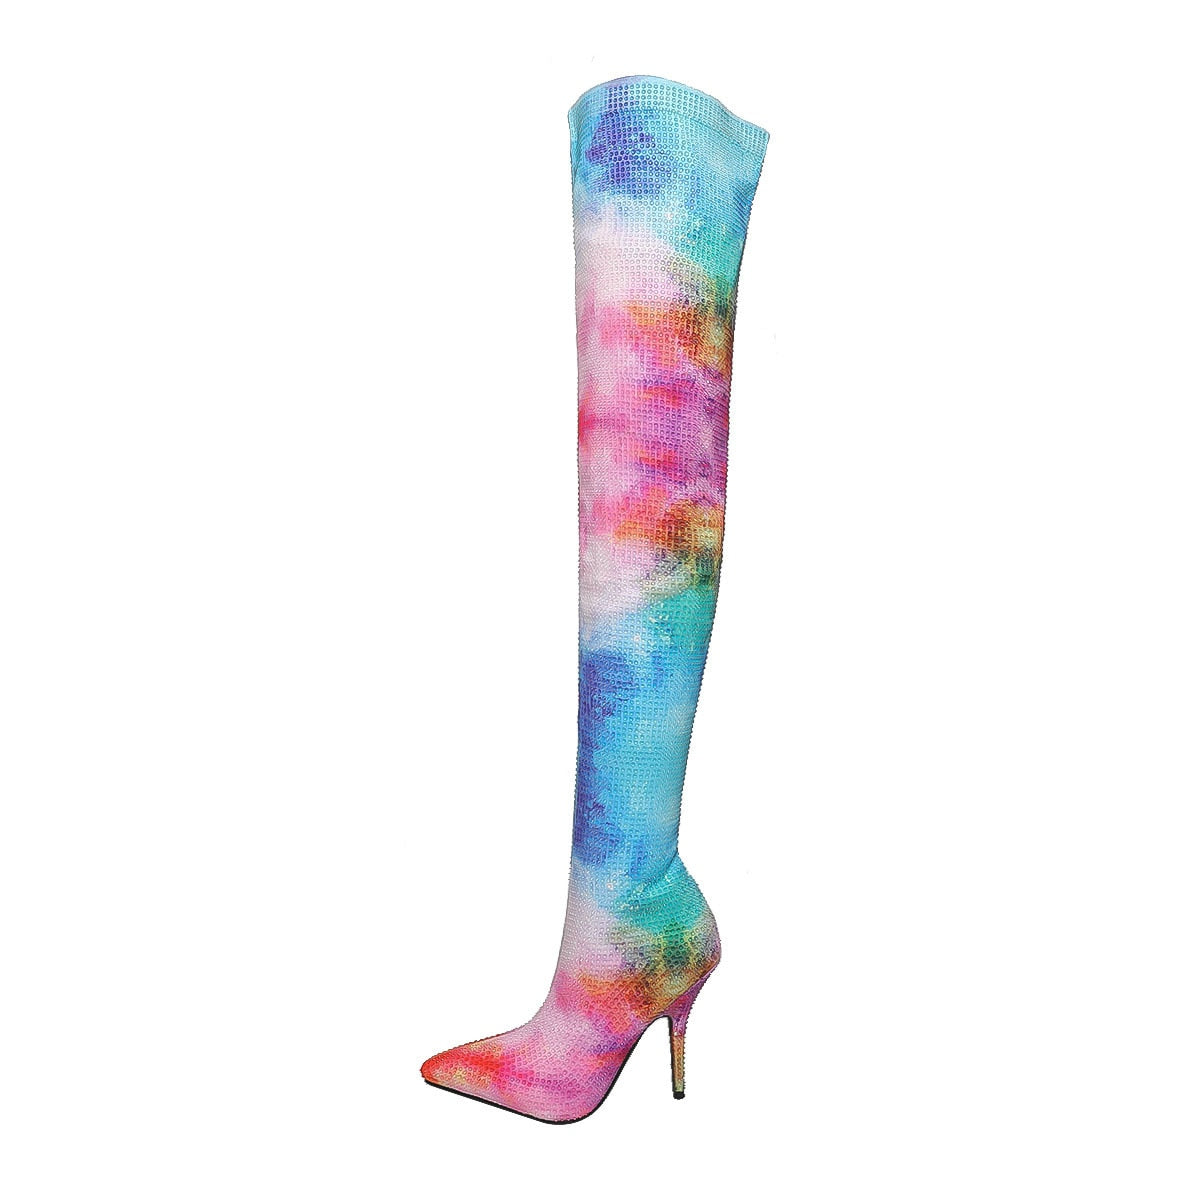 Sexy Rhinestone High Heels Mixed Colors Over-the-knee Boots Pointed Toe Large Size 46 Botines Slip-on Stiletto Botas  -  GeraldBlack.com